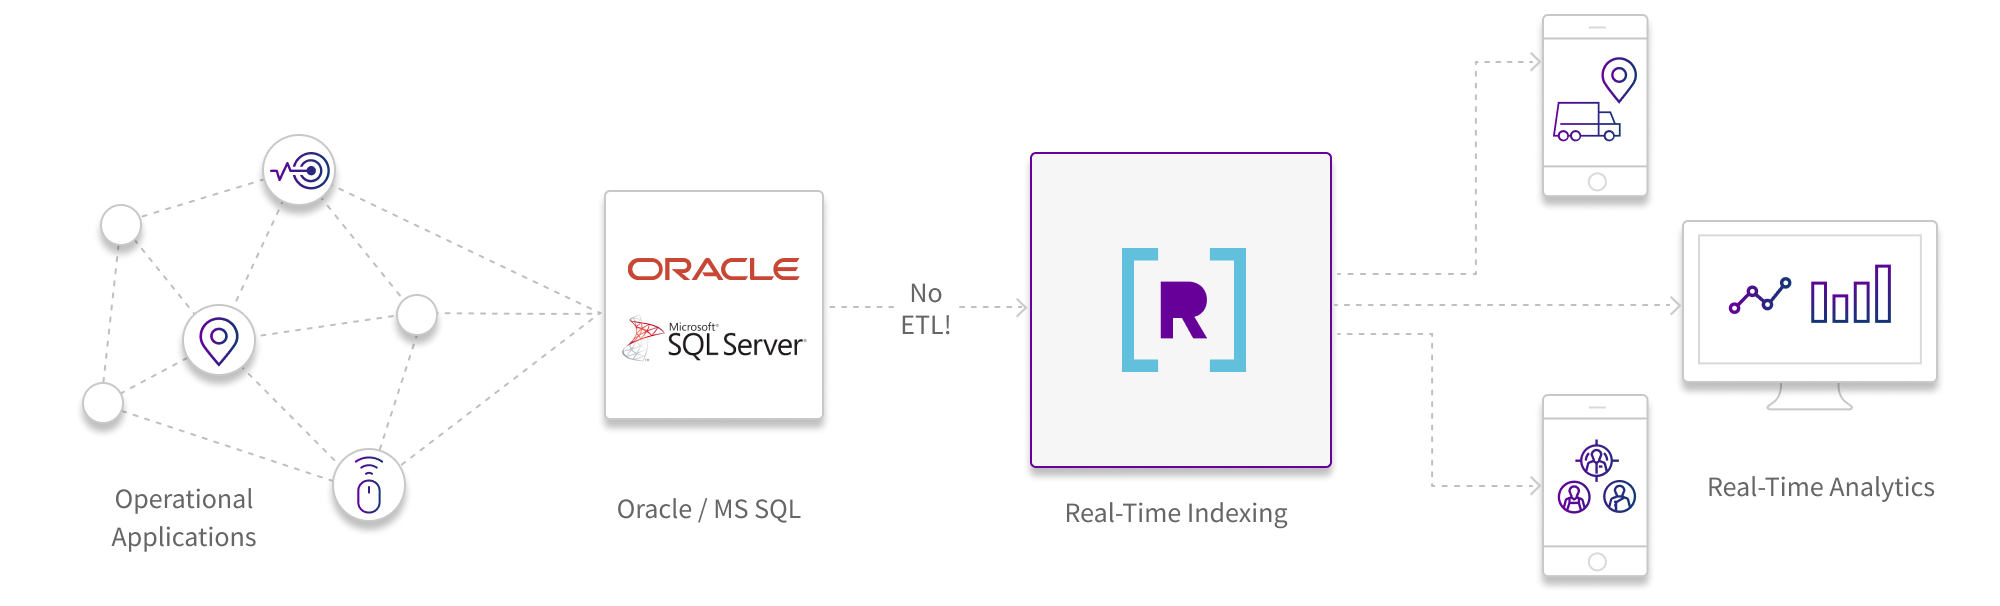 rta-on-oracle-and-msql-image-3